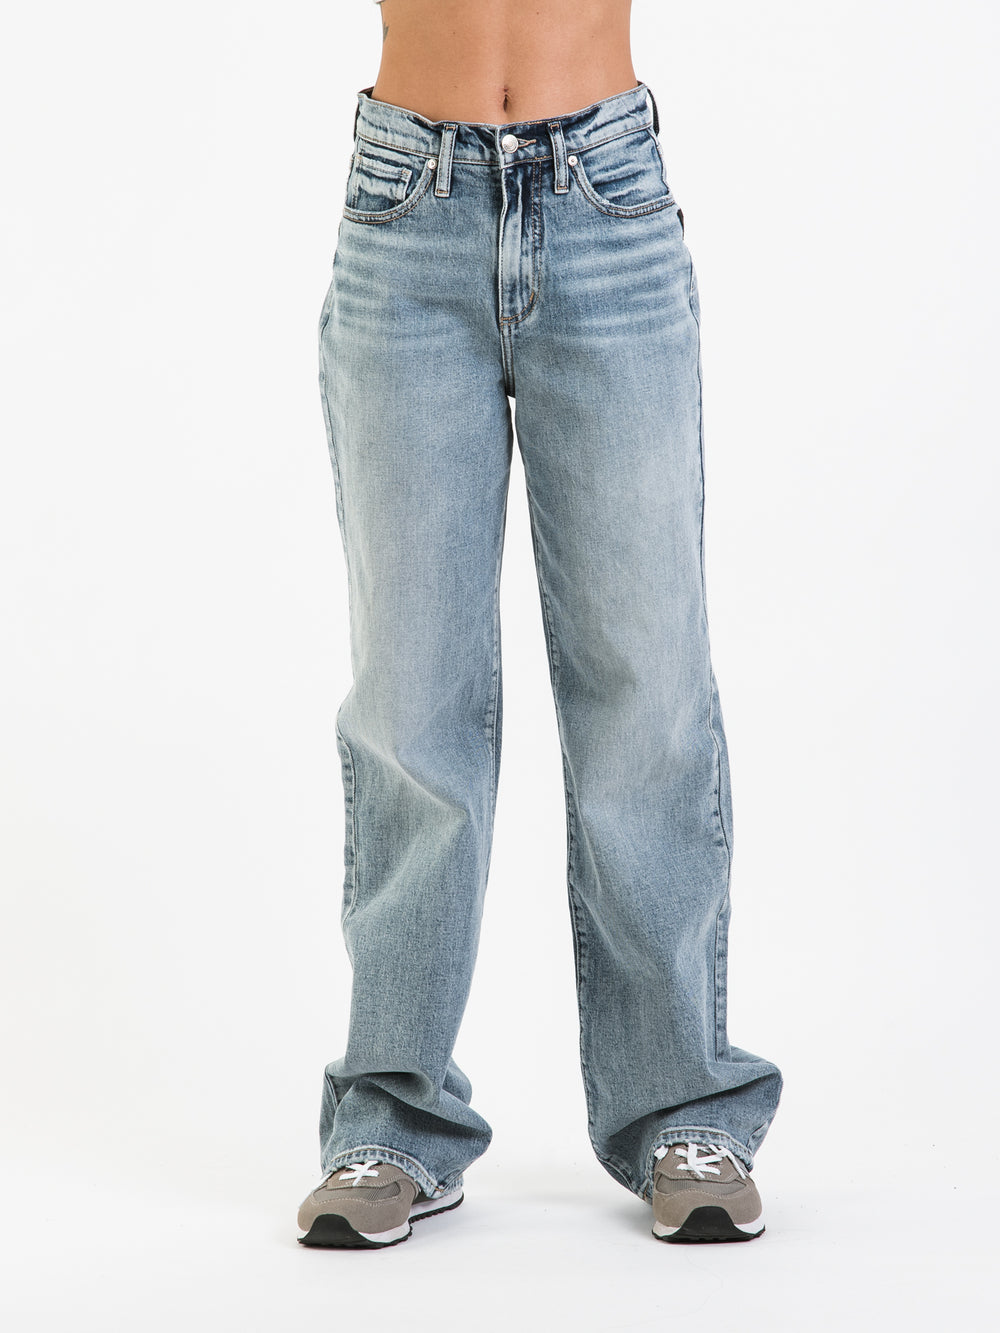 SILVER JEANS 33" HIGHLY DESIRABLE TROUSER - CLEARANCE